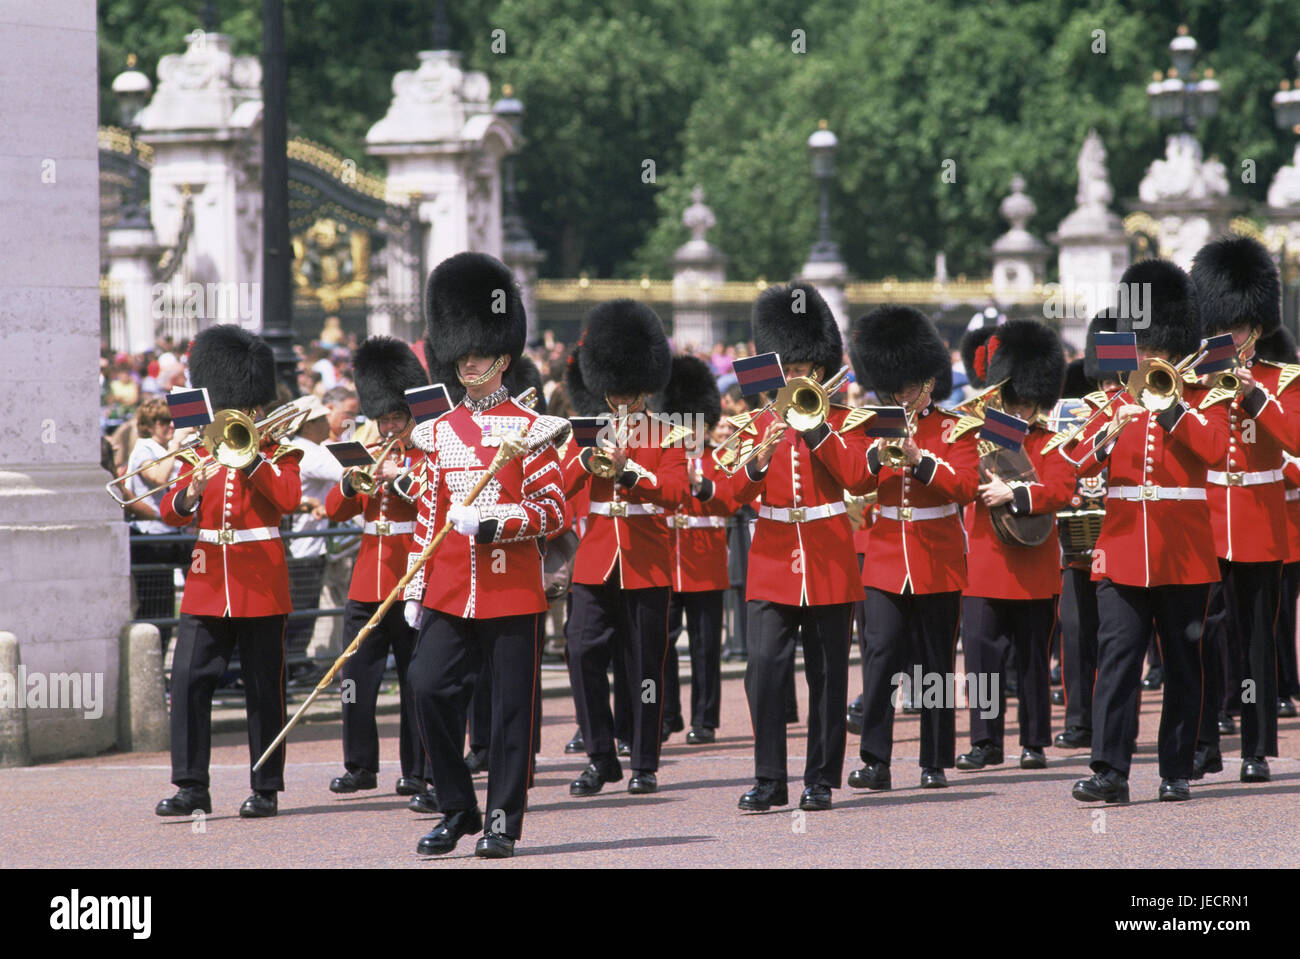 Great Britain, London, Buckingham Palace, save, band, England, capital, person, men, Guards, guard, royal, guard, soldier, men, uniform, go, motion, marching in step, ceremony, tradition, awake soldier, musician, the military, military band, band, attraction, tourist attraction, place of interest, icon, discipline, pride, order, representation, Stock Photo